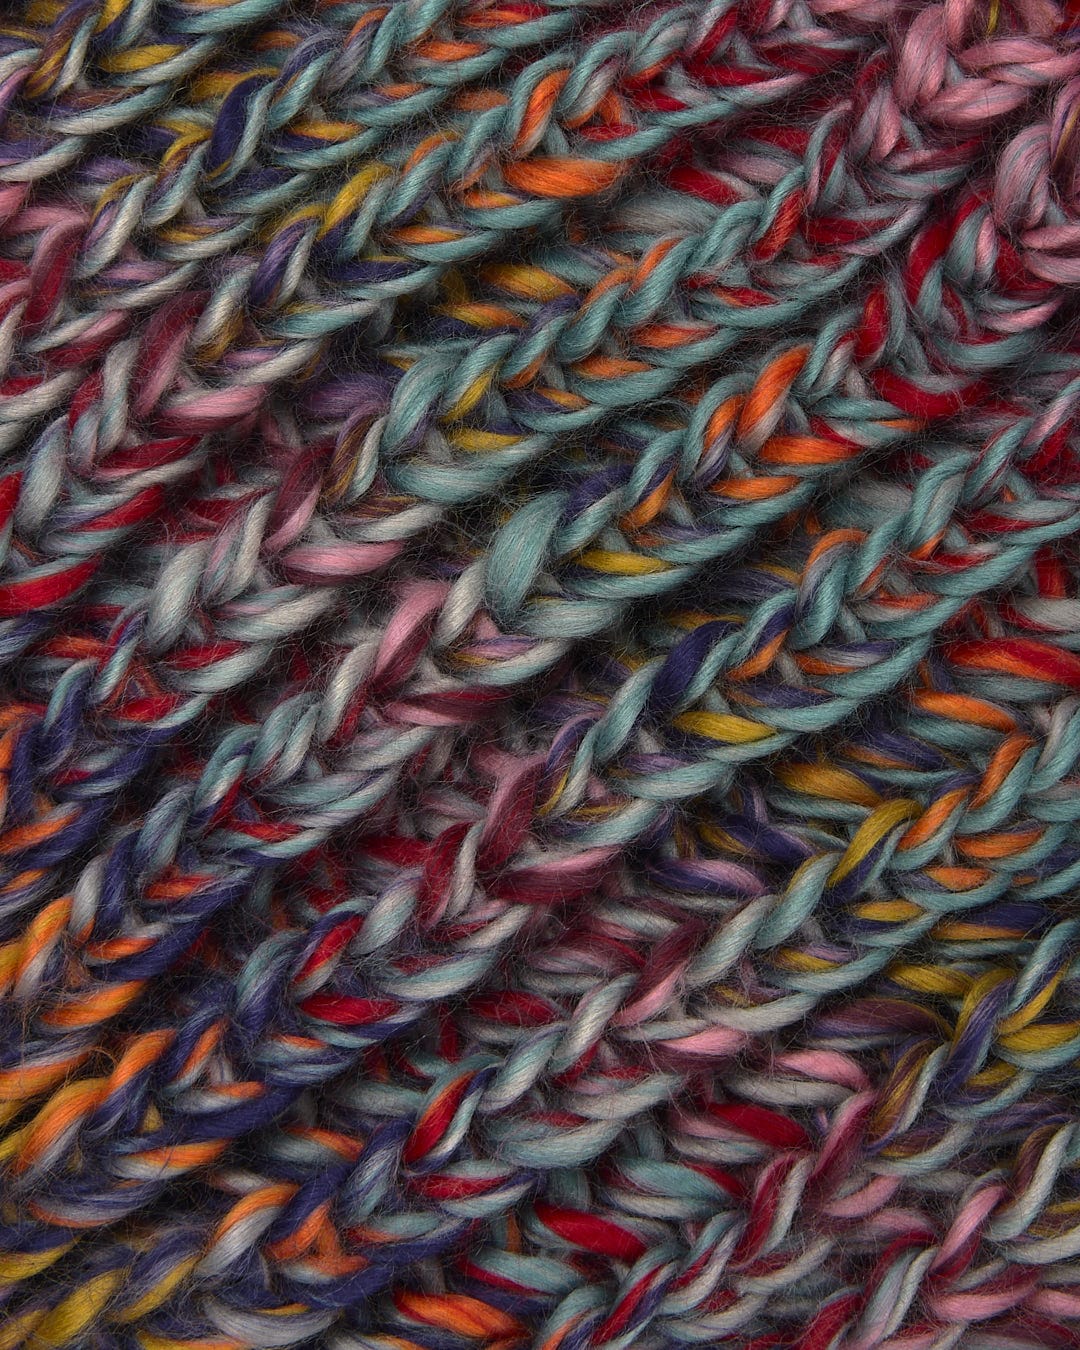 A close up image of a Saltrock Surprise - Beanie - Multi colored yarn.